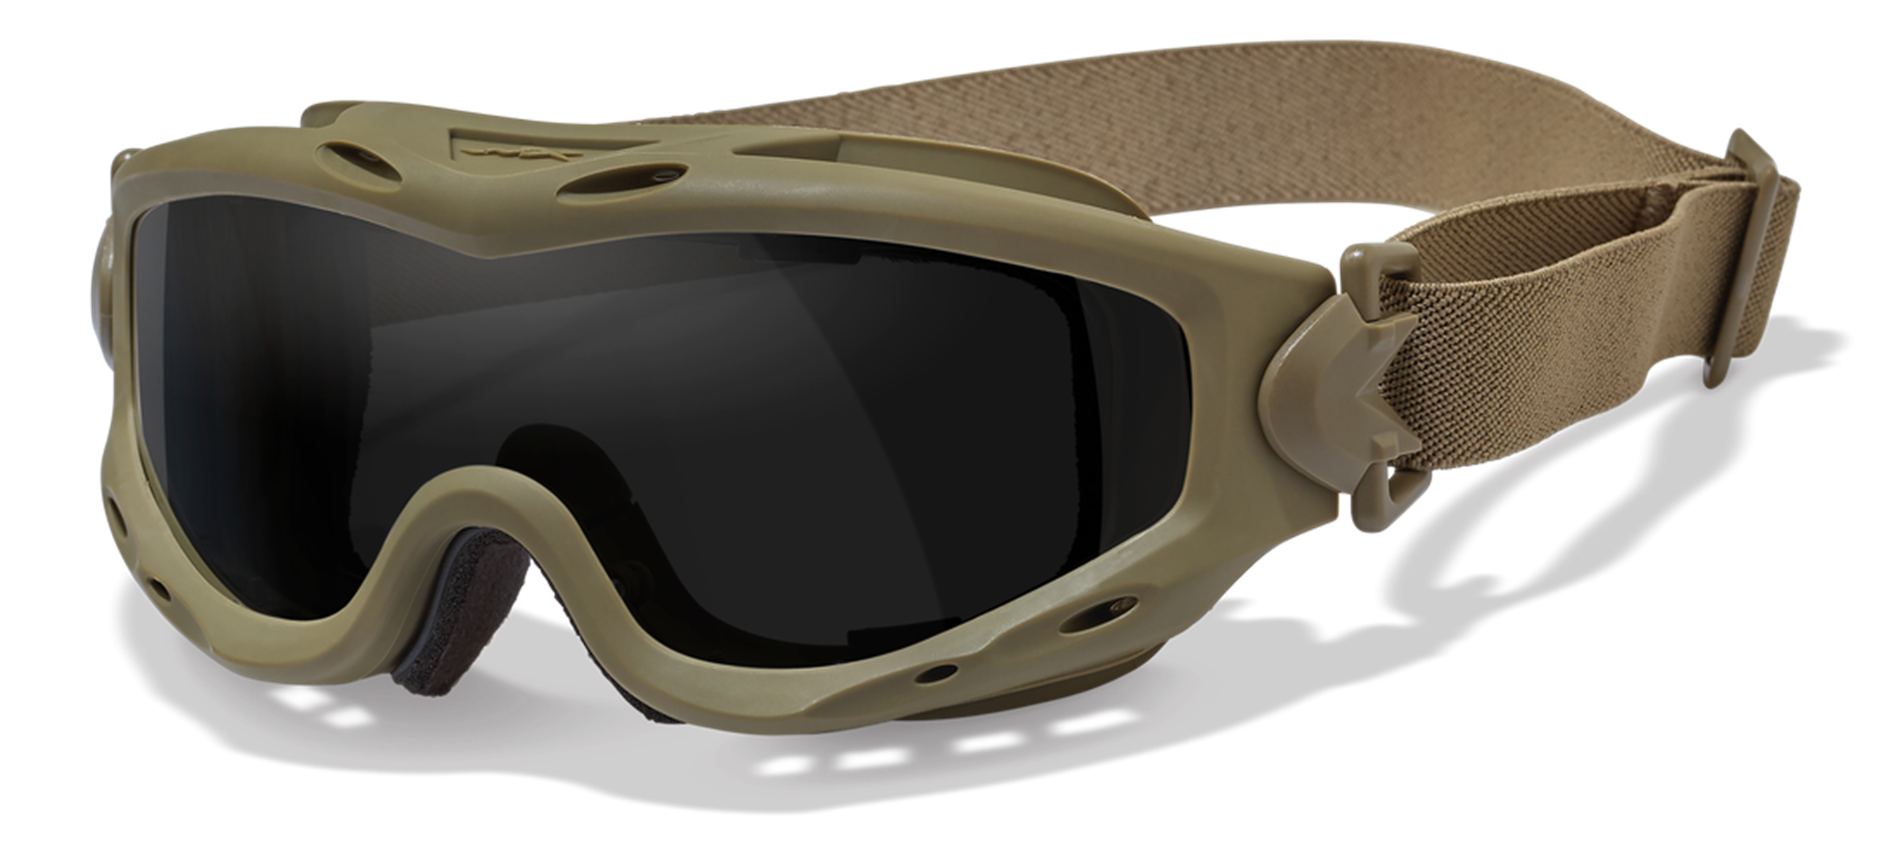 Exploring the Benefits of Onguard 220FS Prescription Safety Glasses